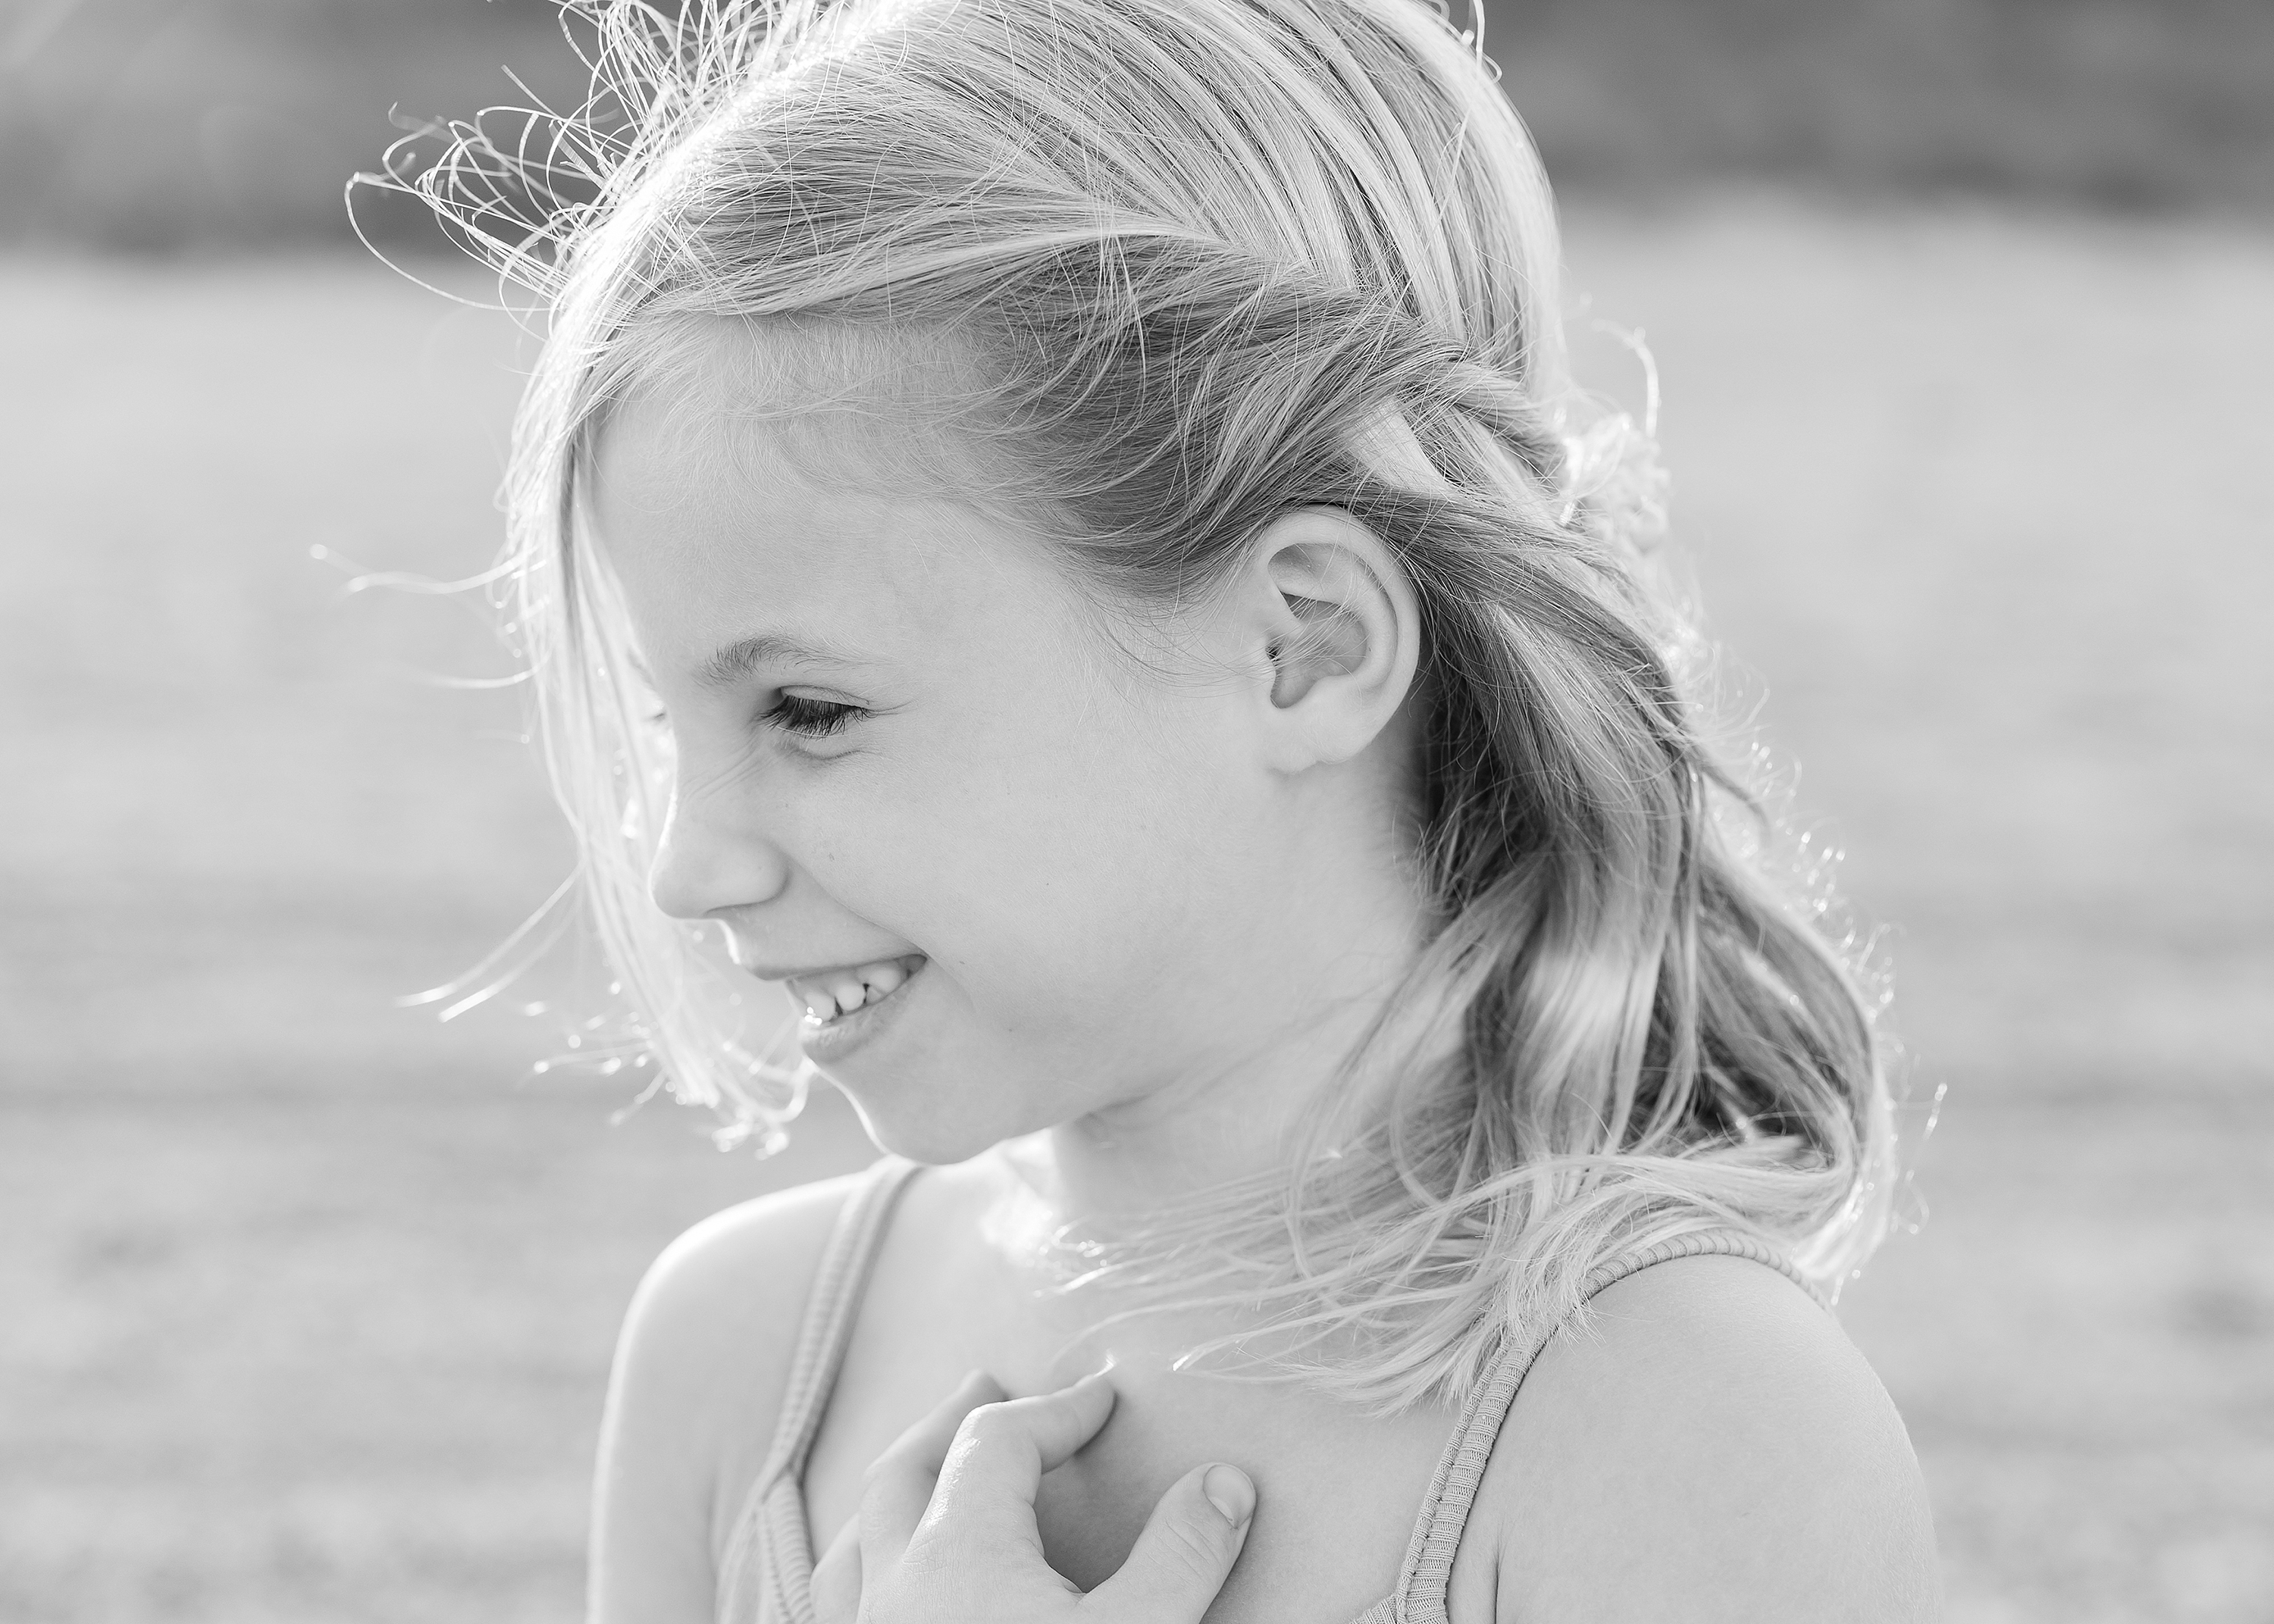 Black and white beach portrait of a little girl with blonde hair smiling.